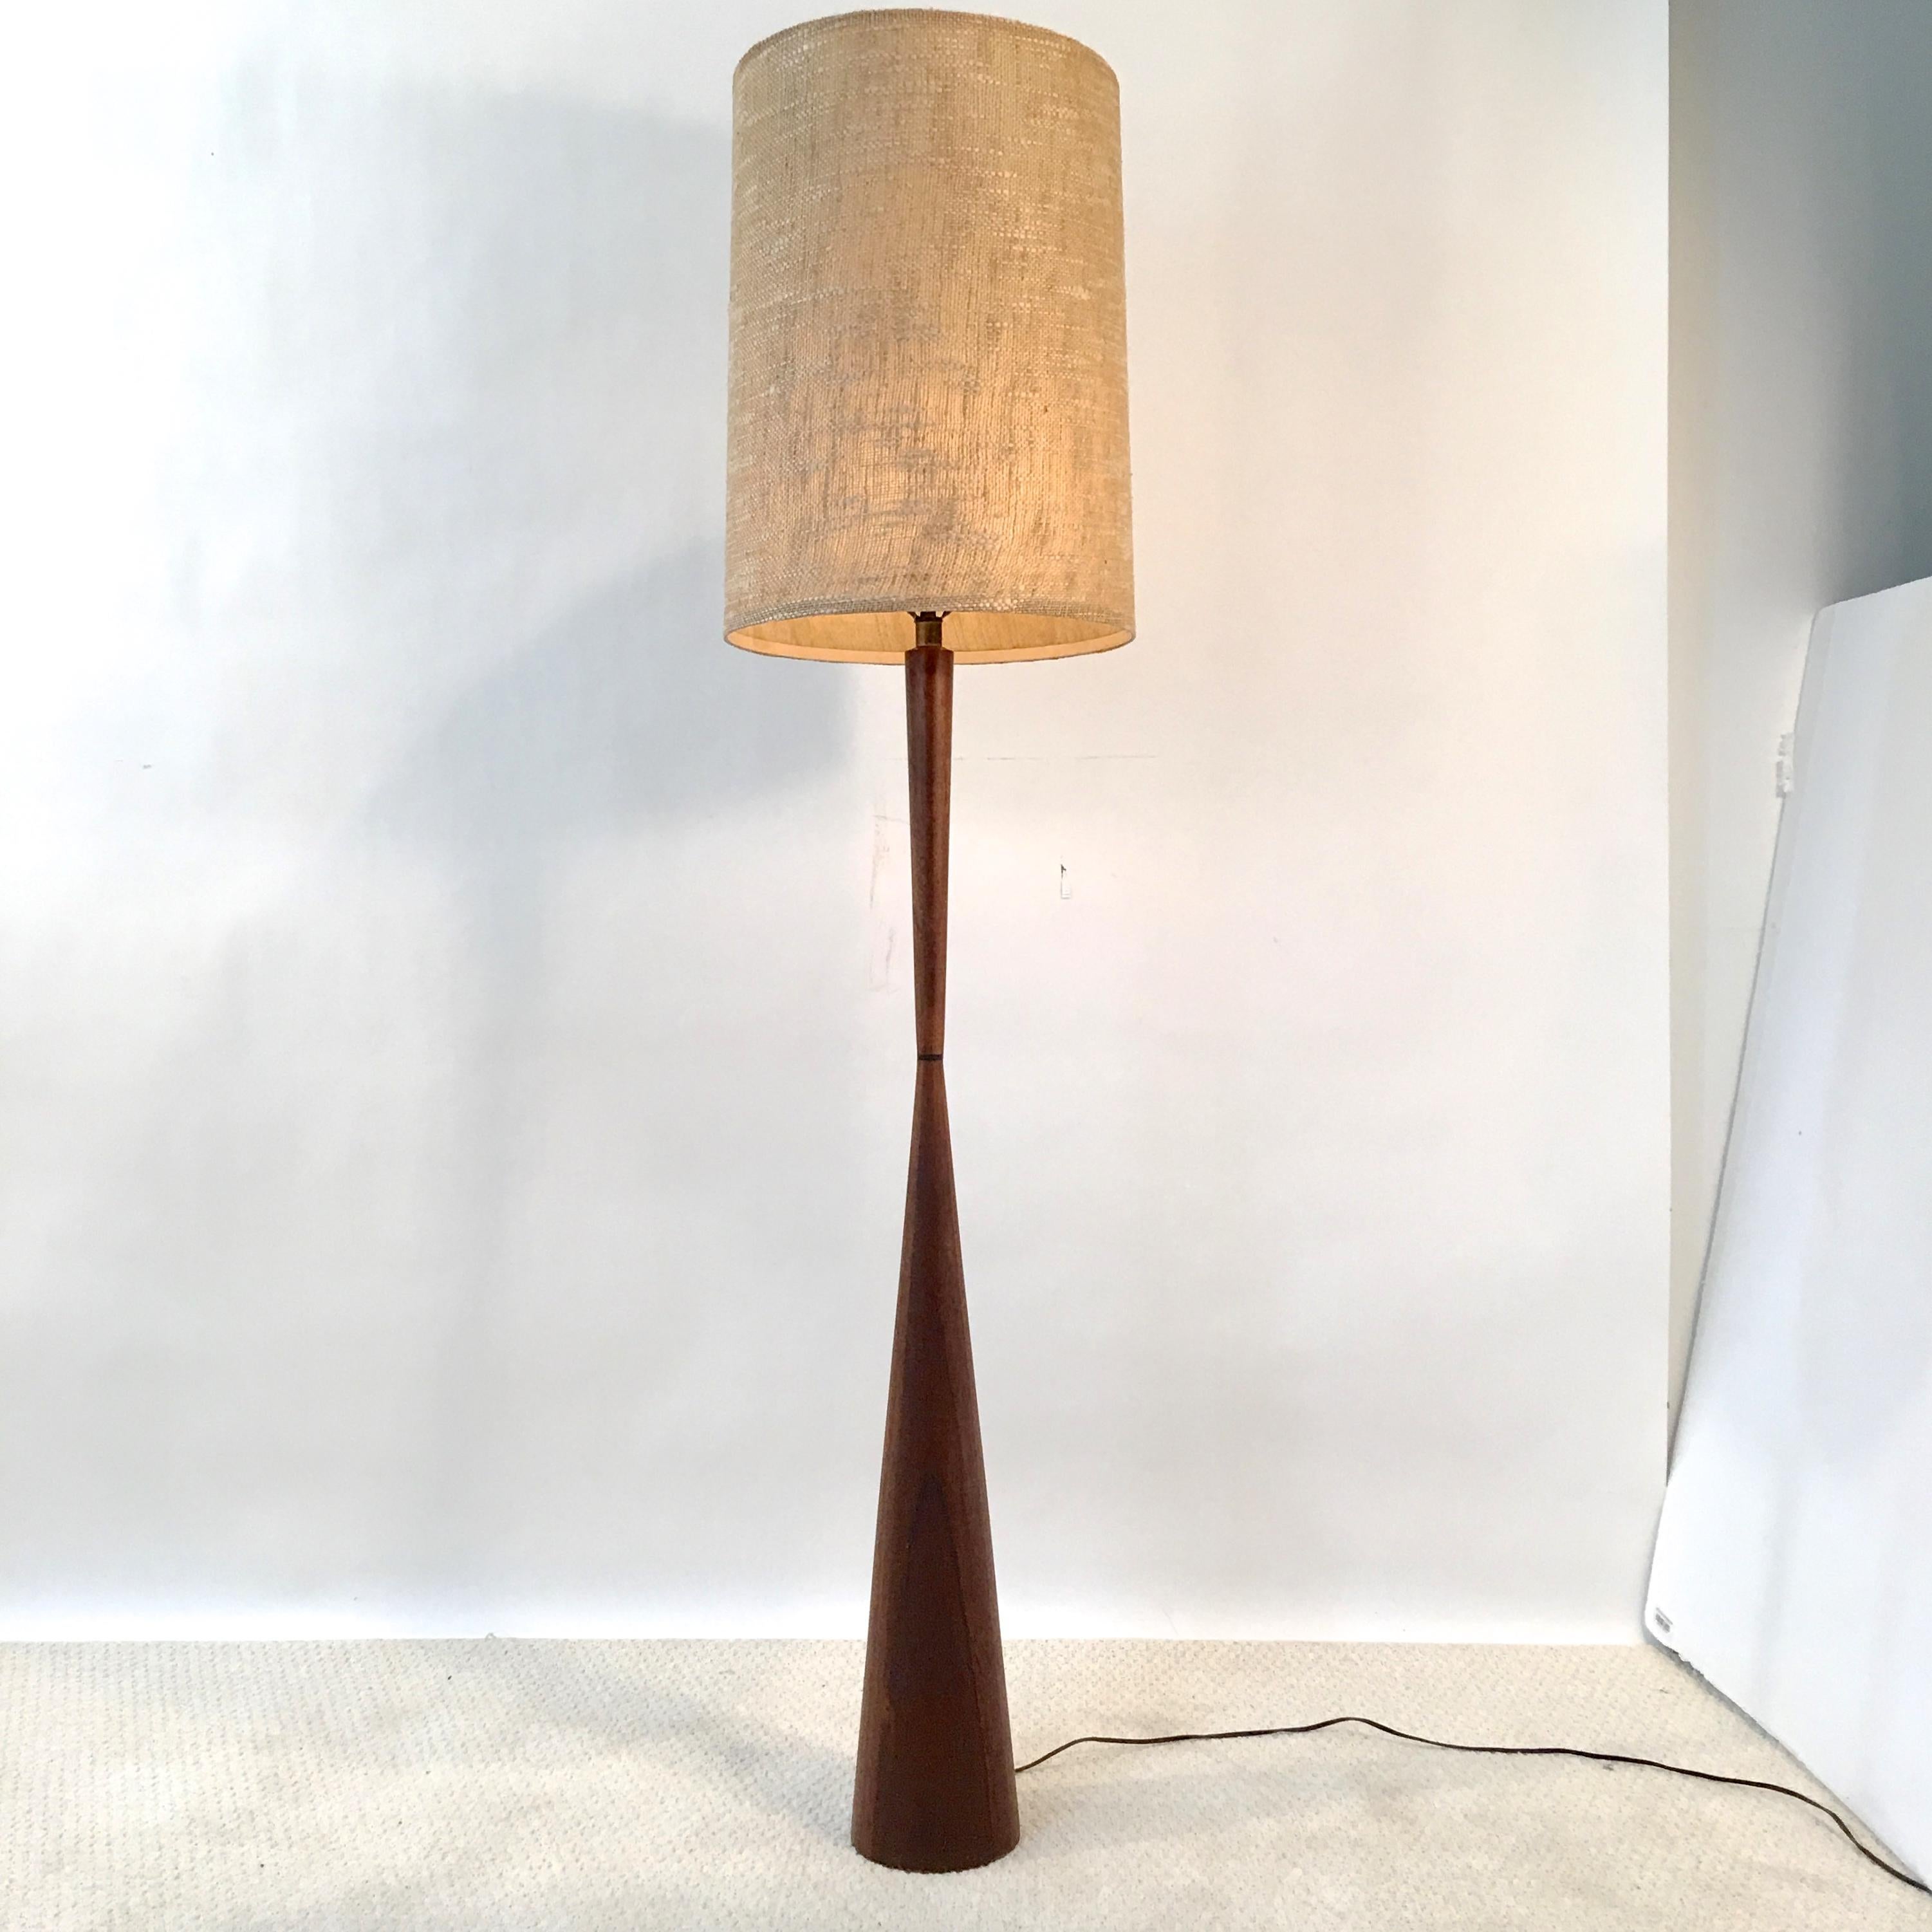 Walnut diabolo form floor lamp designed by Raymond Pfennig for Zina Lamp Co. in Northern California circa 1960. Original woven drum shade included. 
46